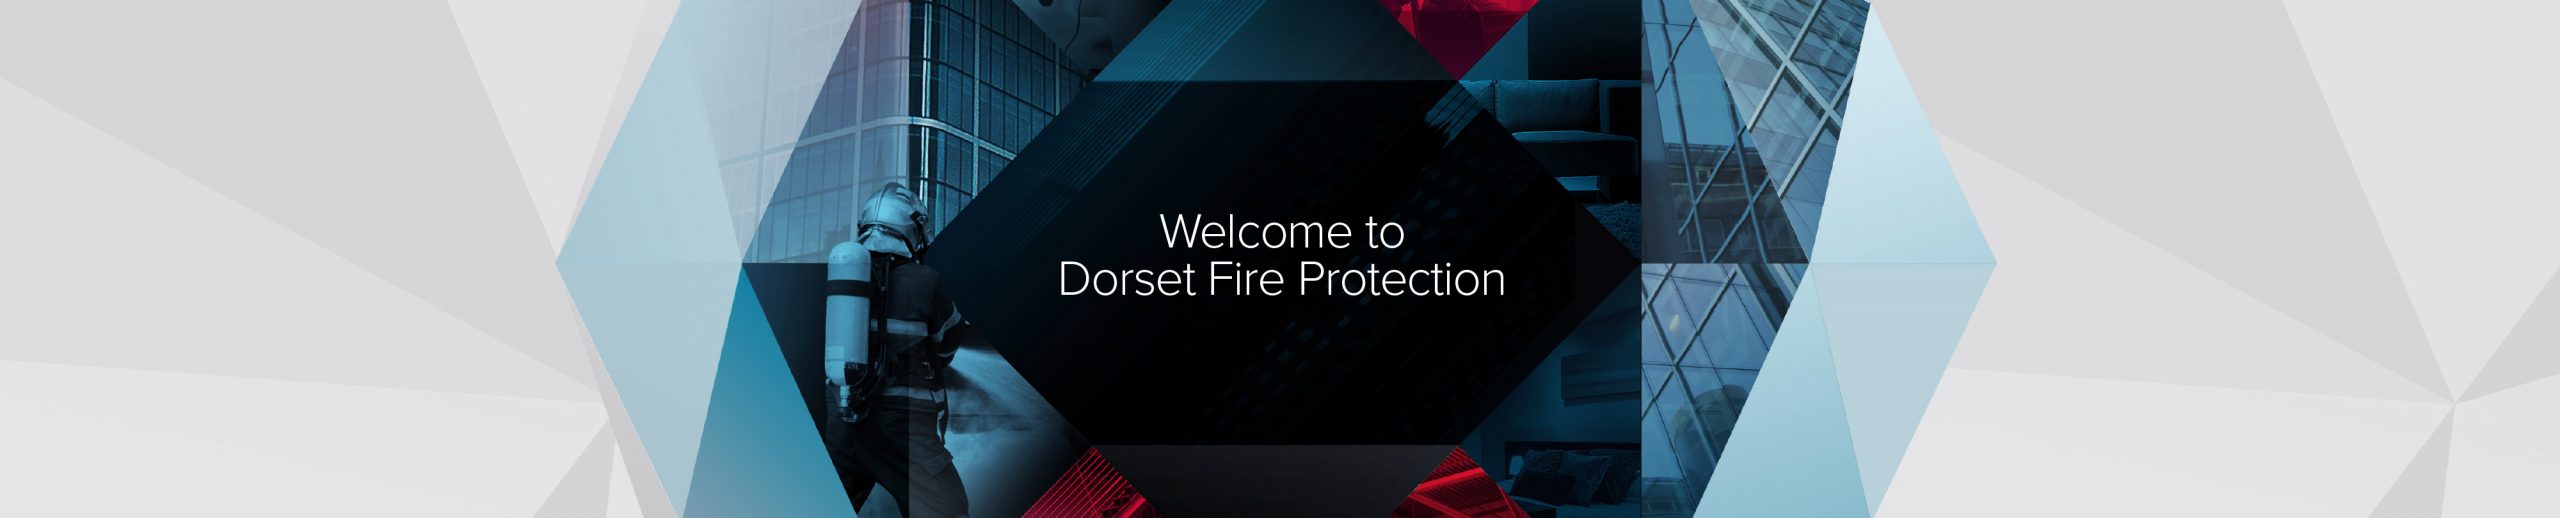 Welcome to Dorset Fire Protection logo banner